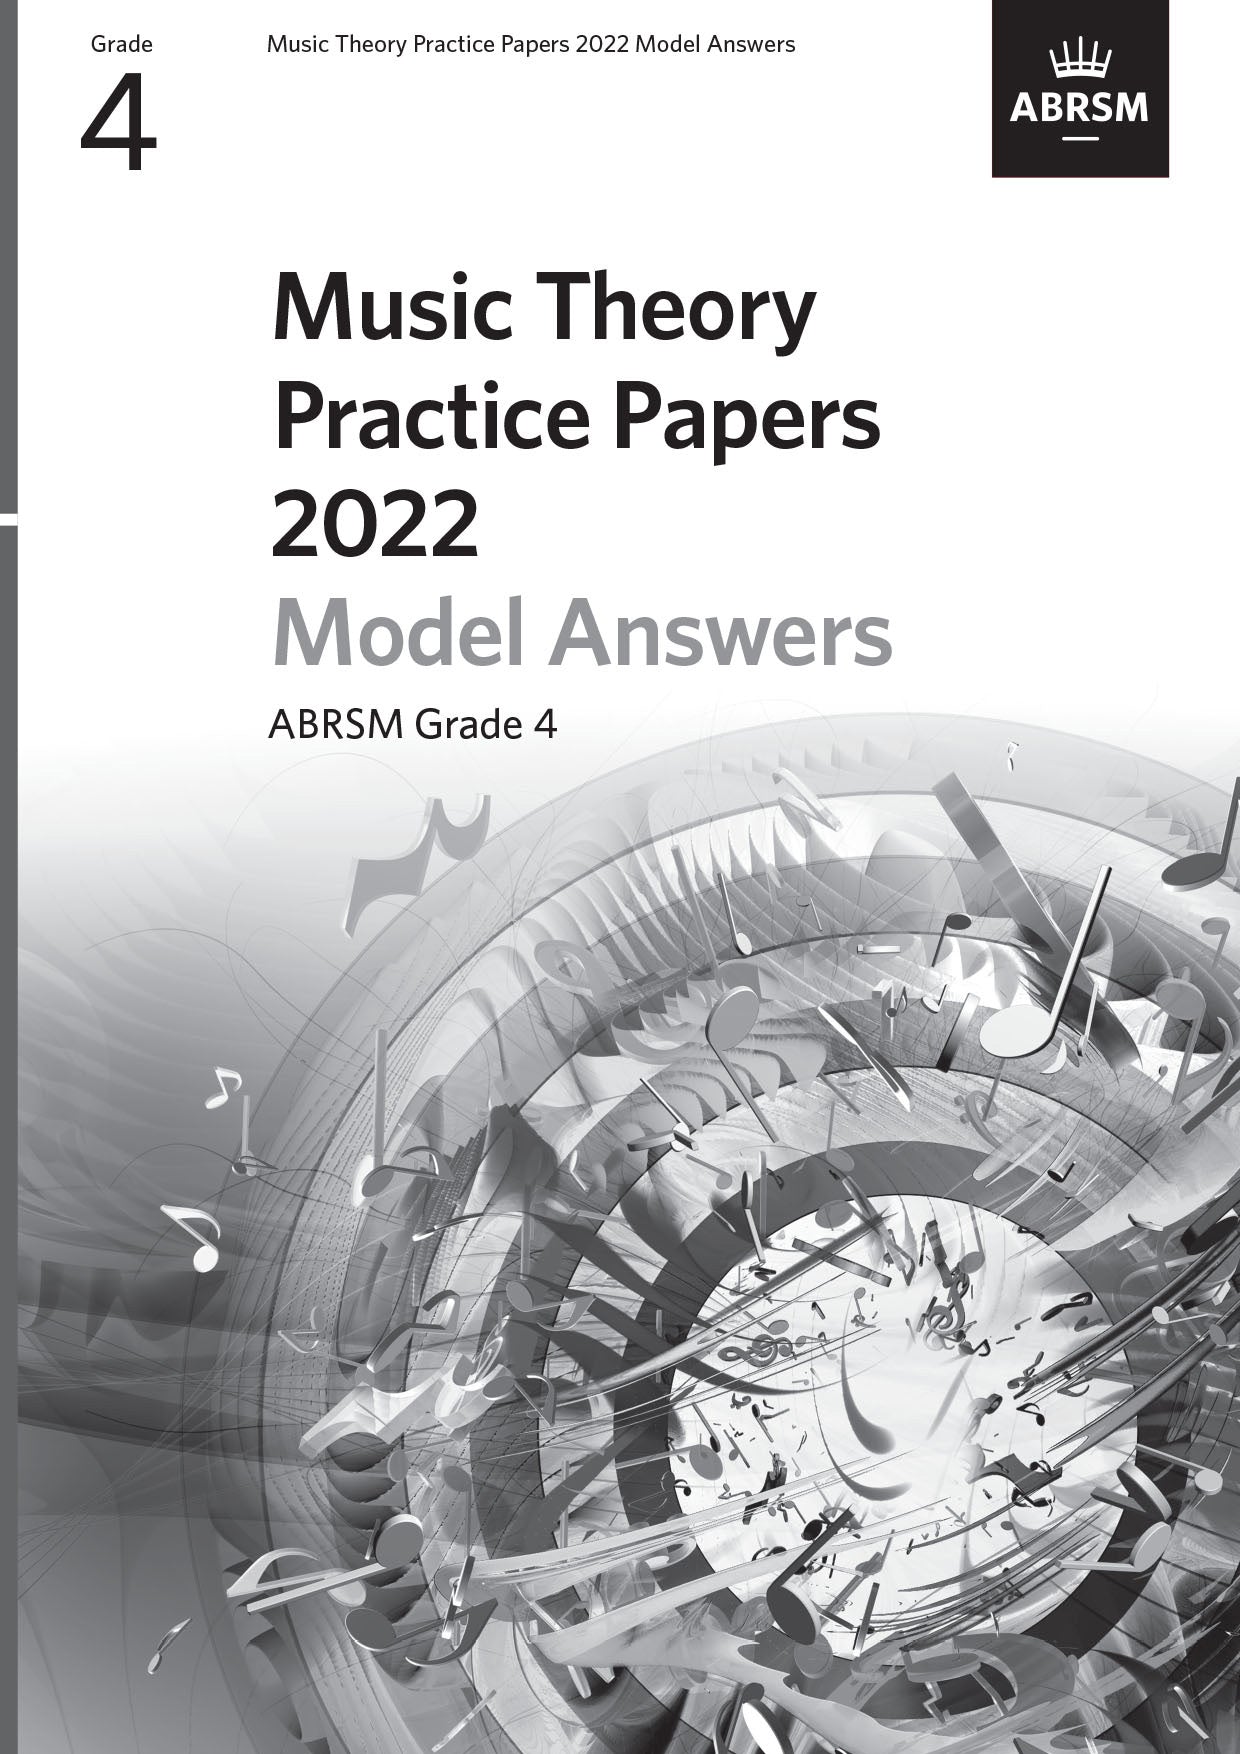 ABRSM Music Theory Practice Papers Model Answers 2022 Grade 4